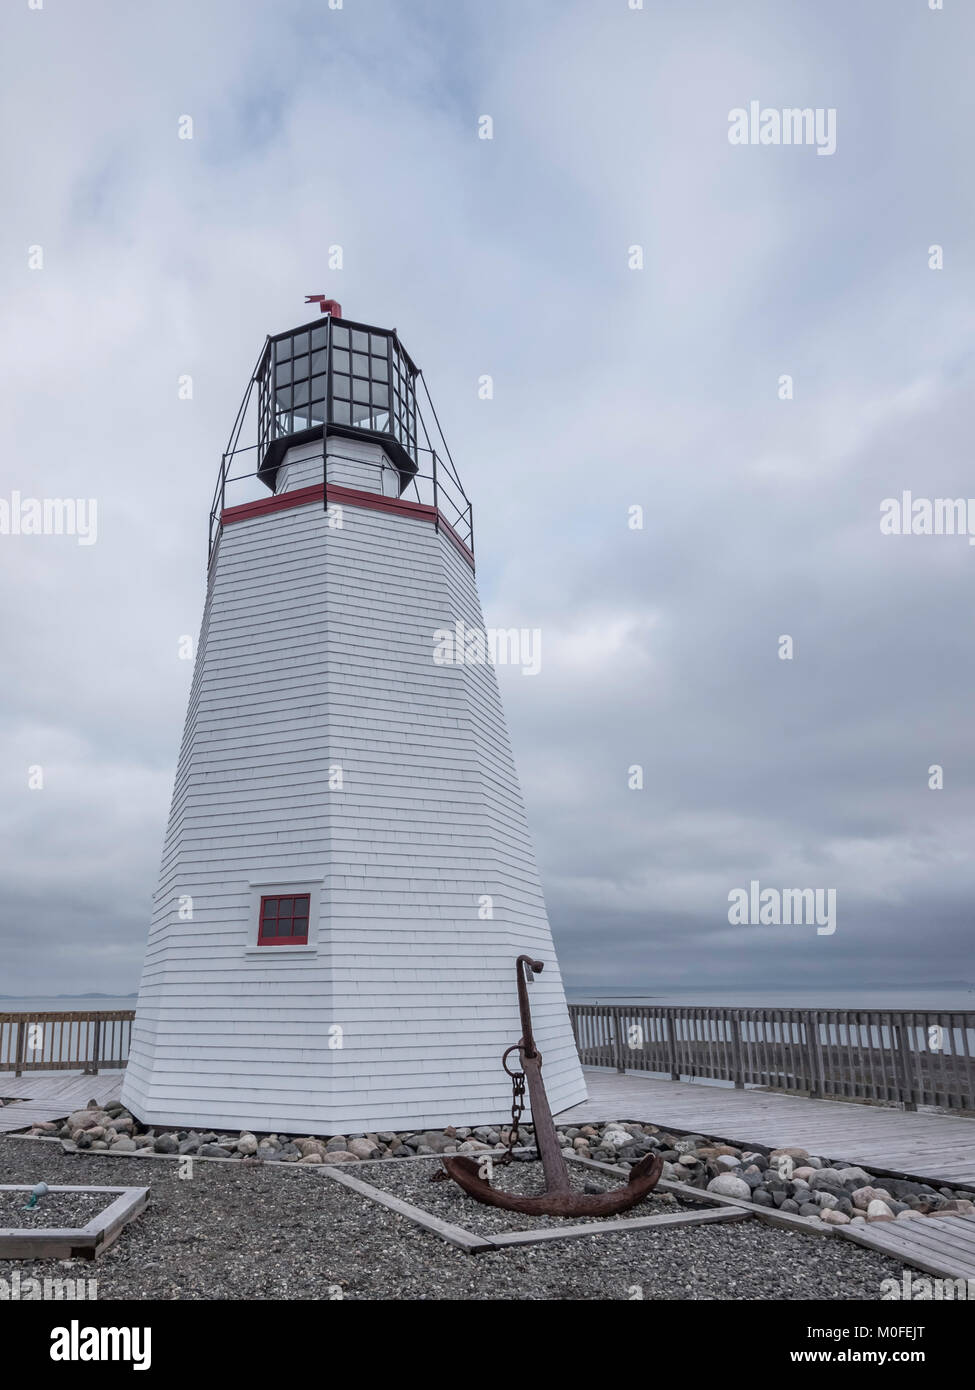 Saint Andrews, New Brunswick / Canada - October 9, 2016: Pendlebury Lighthouse is the oldest remaining mainland lighthouse in New Brunswick. Stock Photo